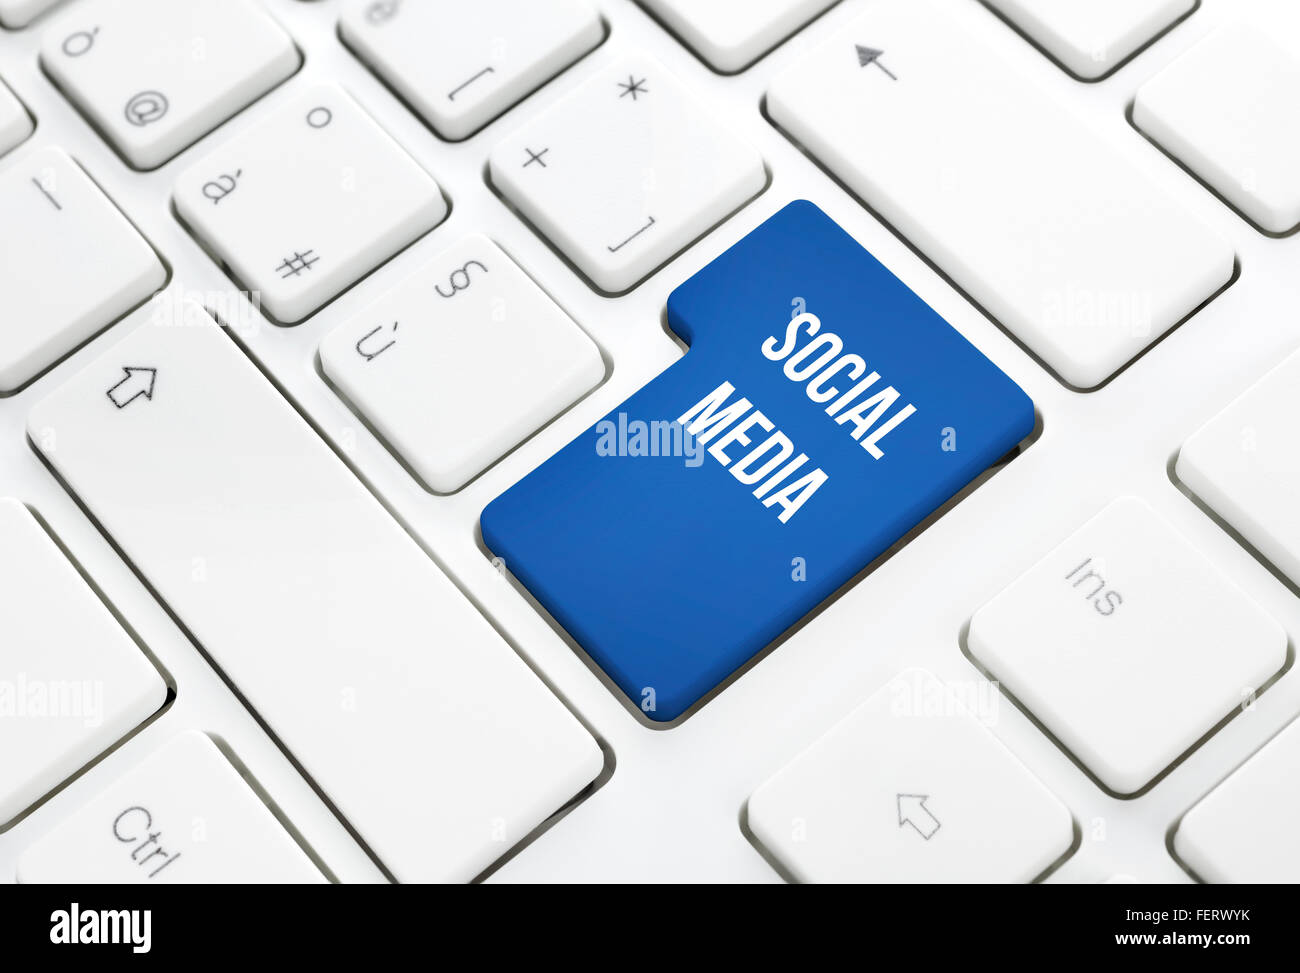 Social Media network business concept, blue enter button or key on white keyboard photography. Stock Photo